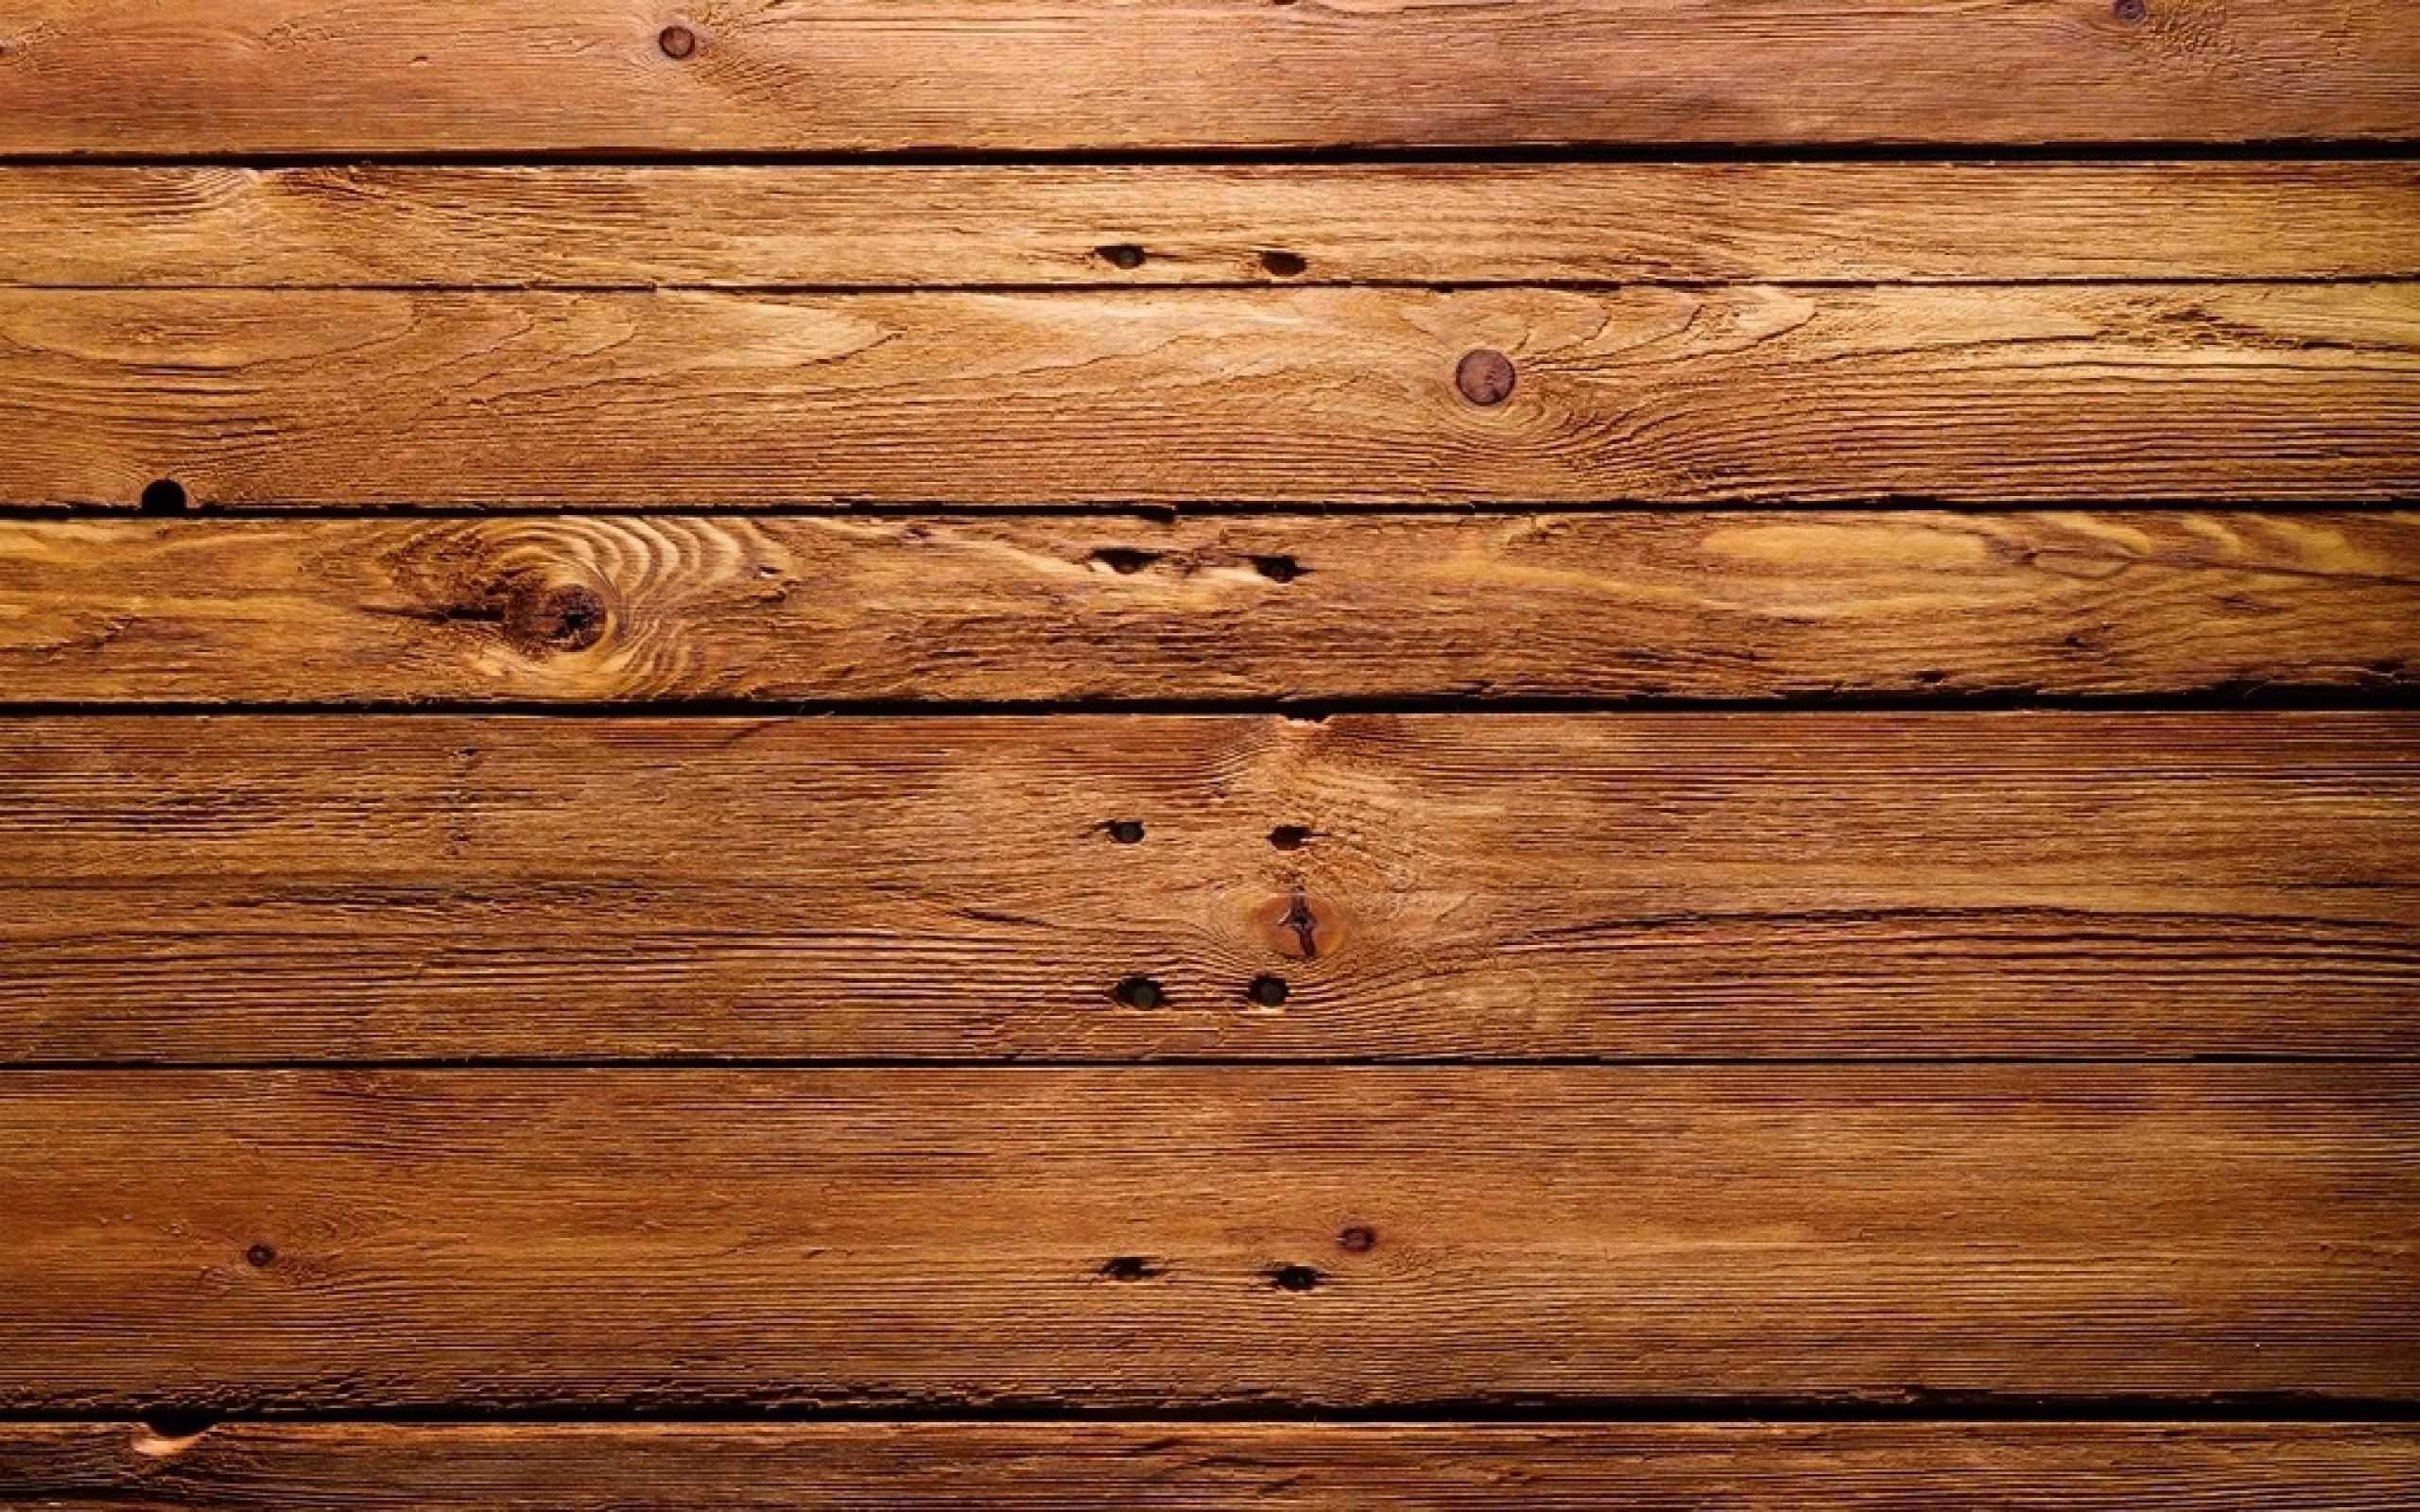 2560x1600 The Best Green is Brown: Why Sustainable Wood Is Good | Conscious Connection | Wood grain wallpaper, Rustic wood wallpaper, Wood wallpaper